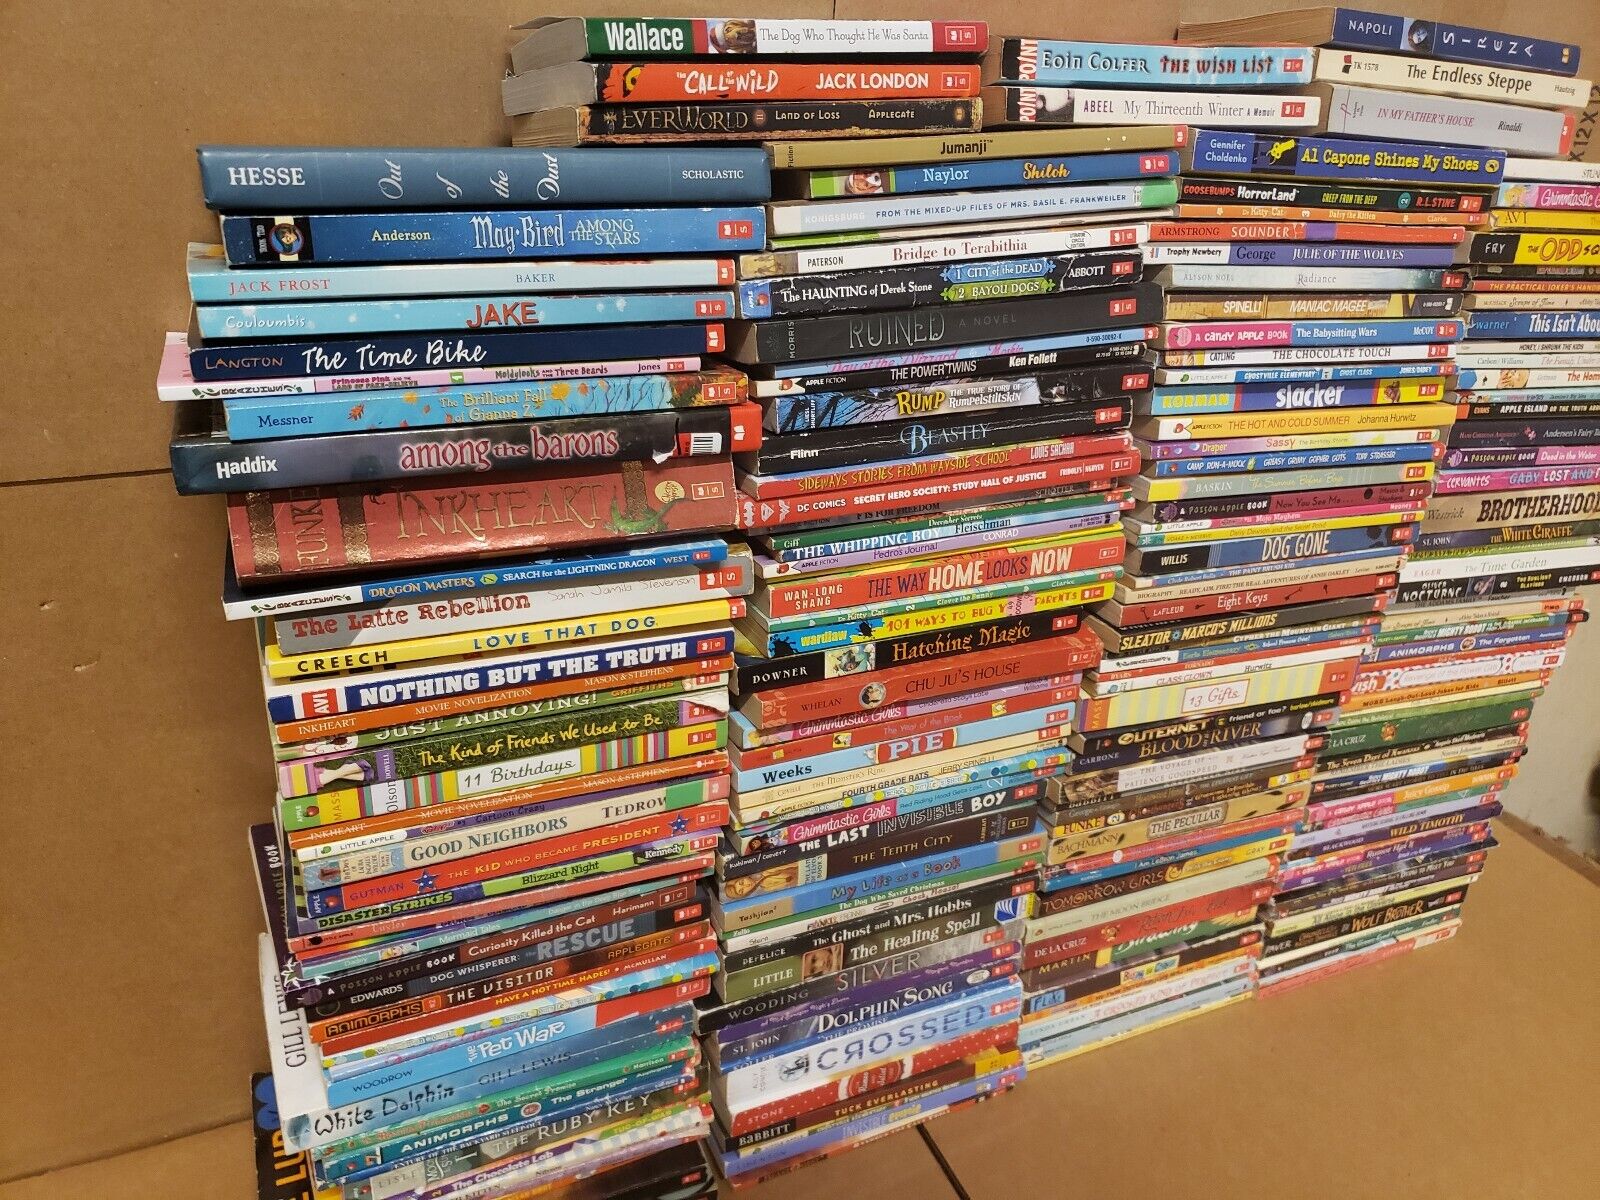 Lot of 50 Chapter INSTANT LIBRARY Children Young Adult RANDOM UNSORTED BOOKS MIX Без бренда - фотография #8